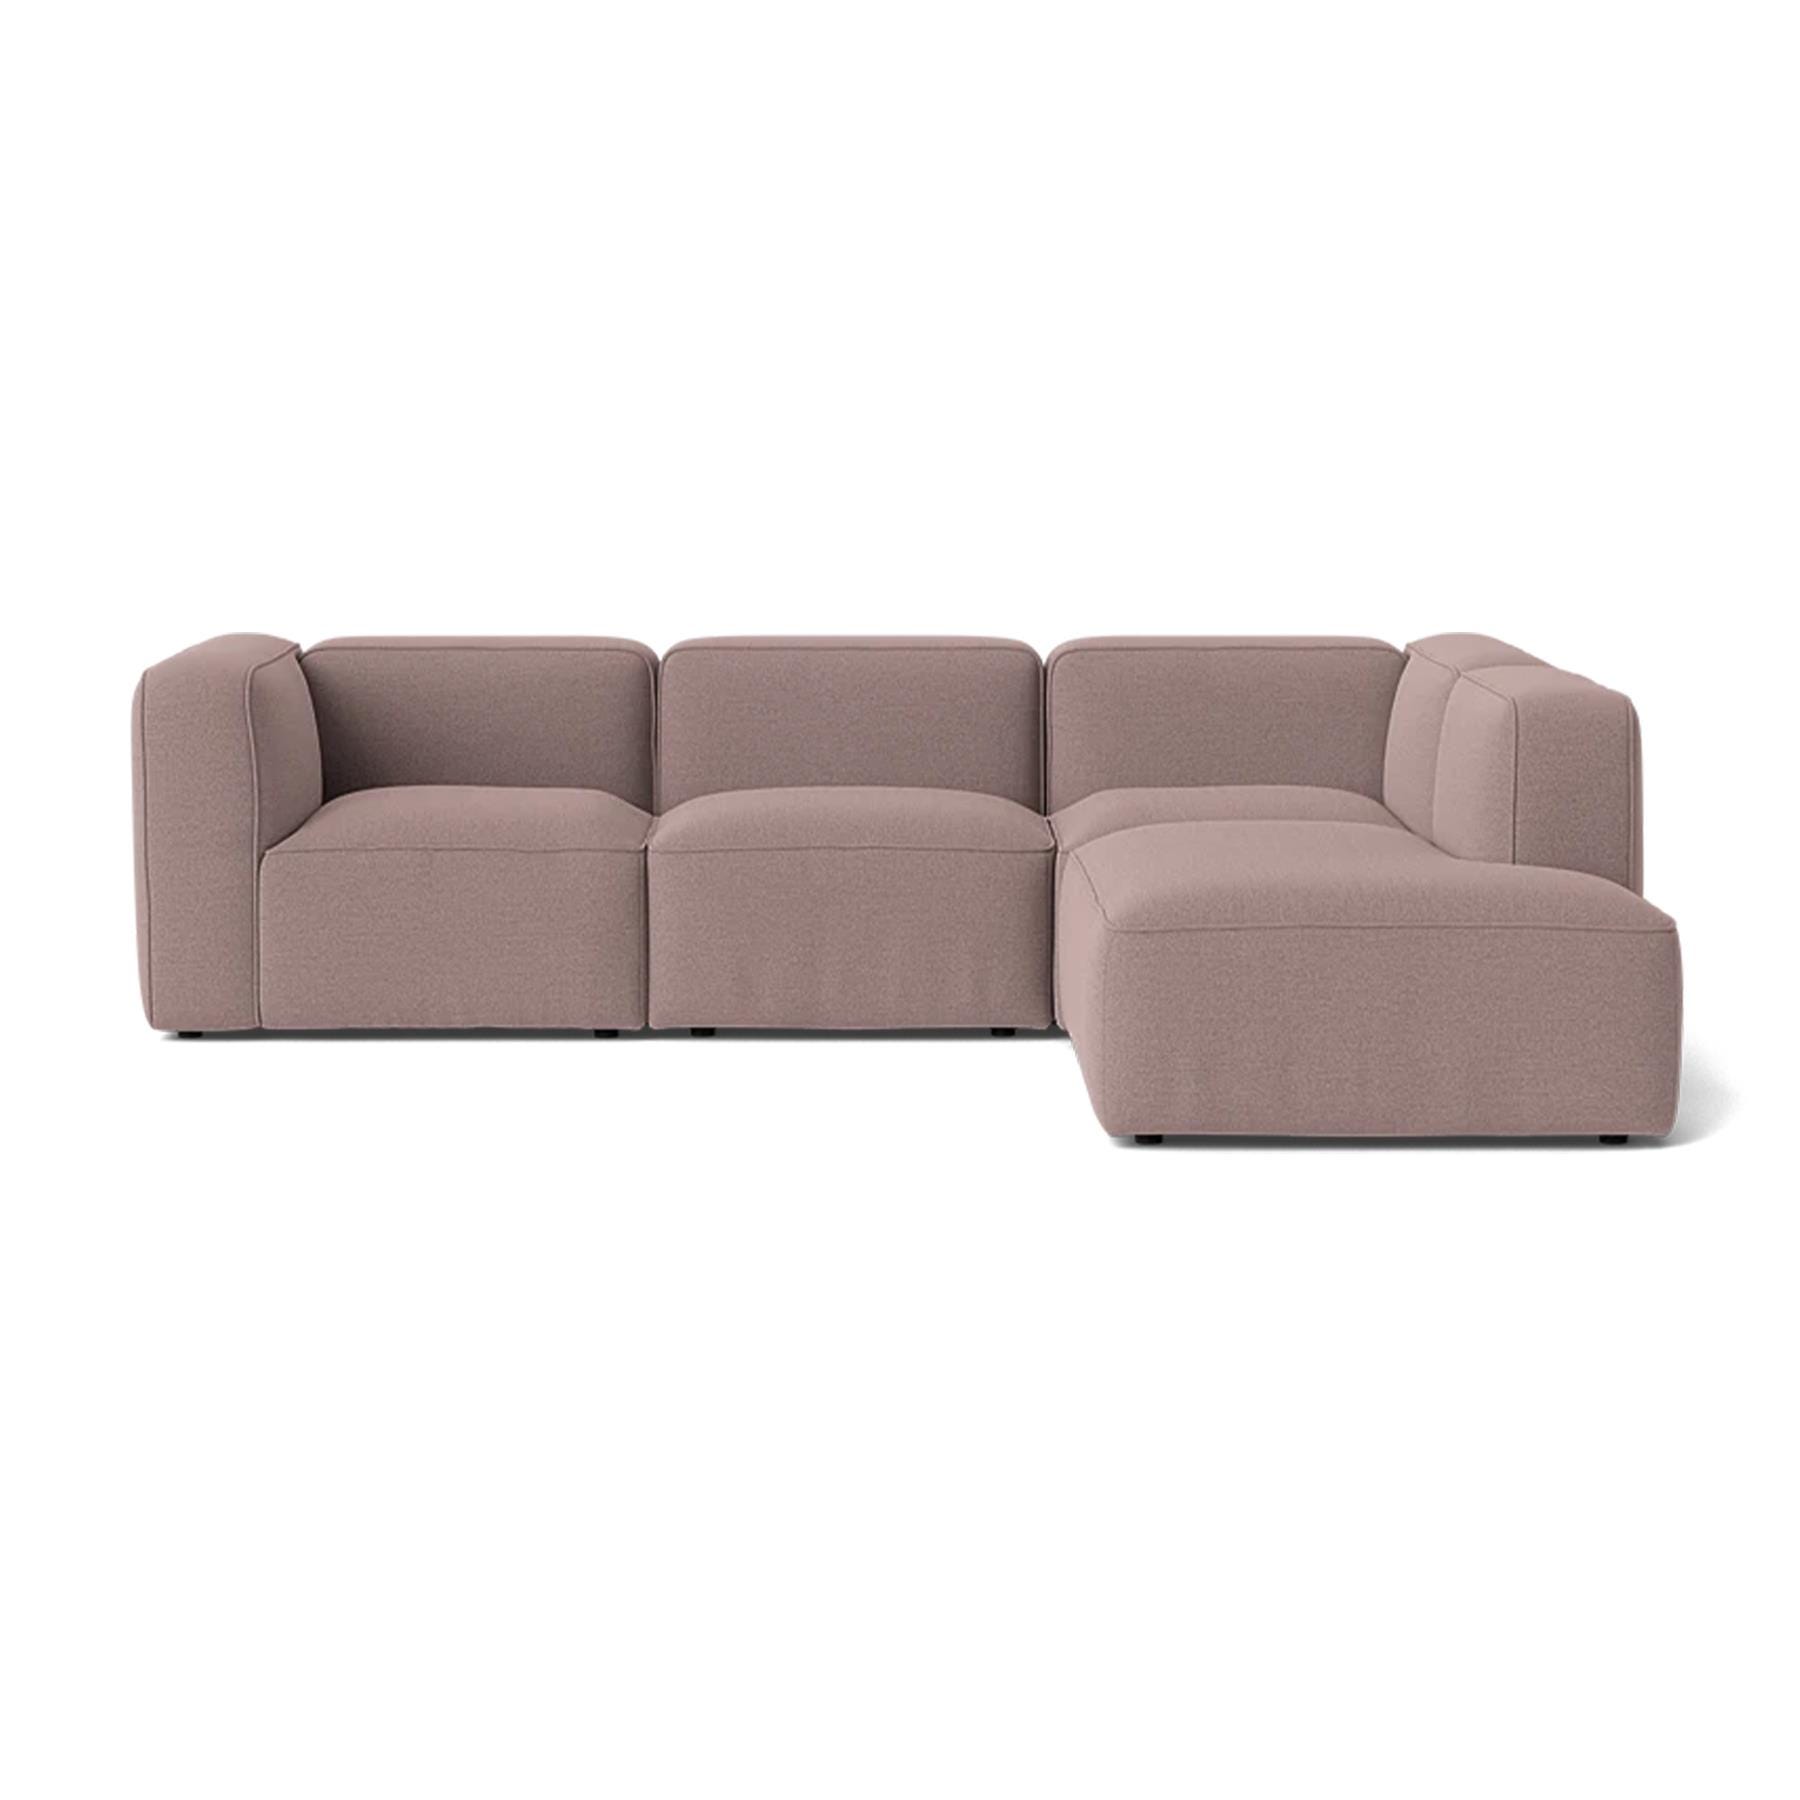 Make Nordic Basecamp Small Family Sofa Rewool 648 Right Pink Designer Furniture From Holloways Of Ludlow